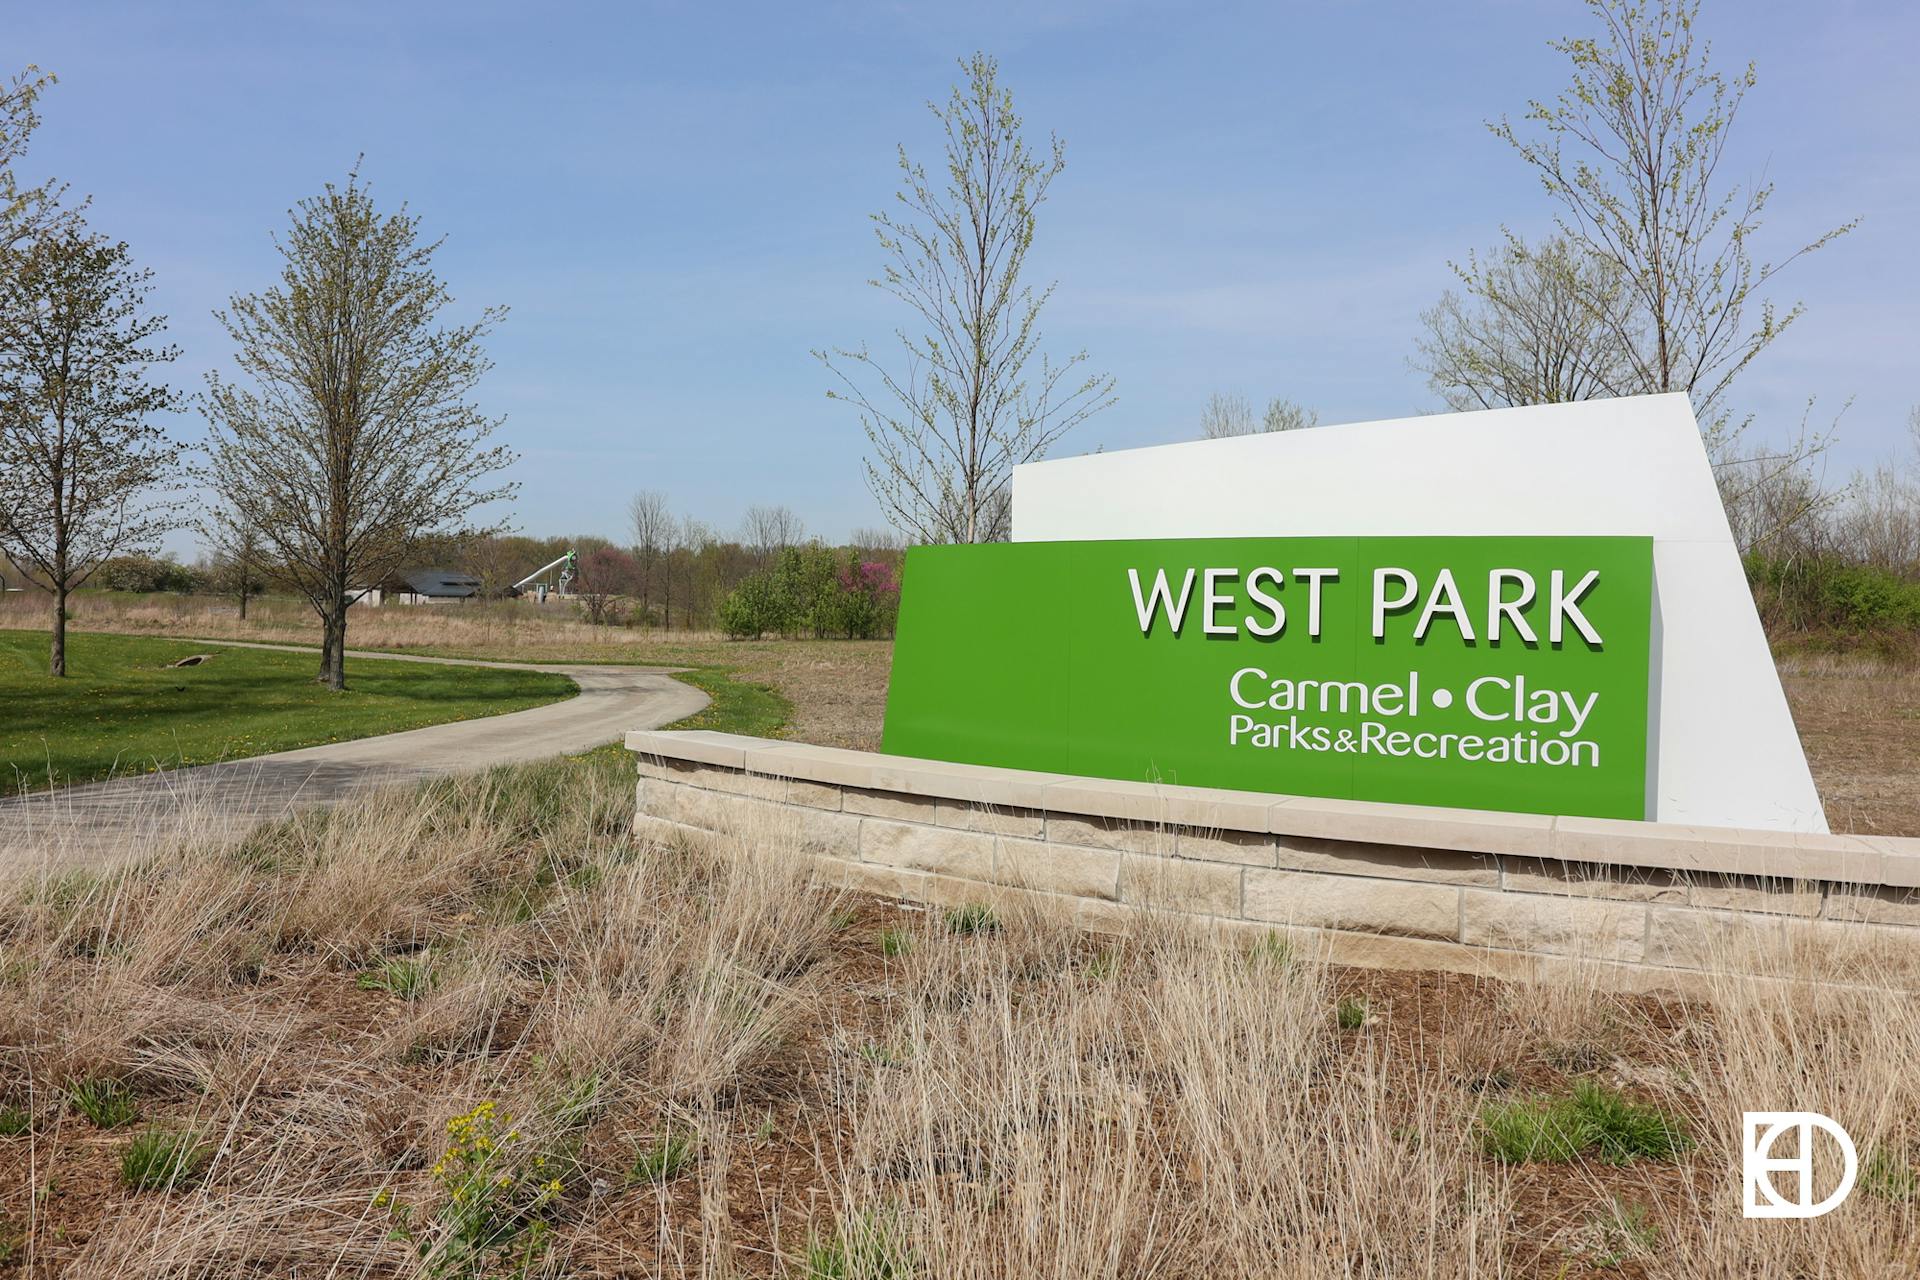 Photos of entrance sign of West Park.